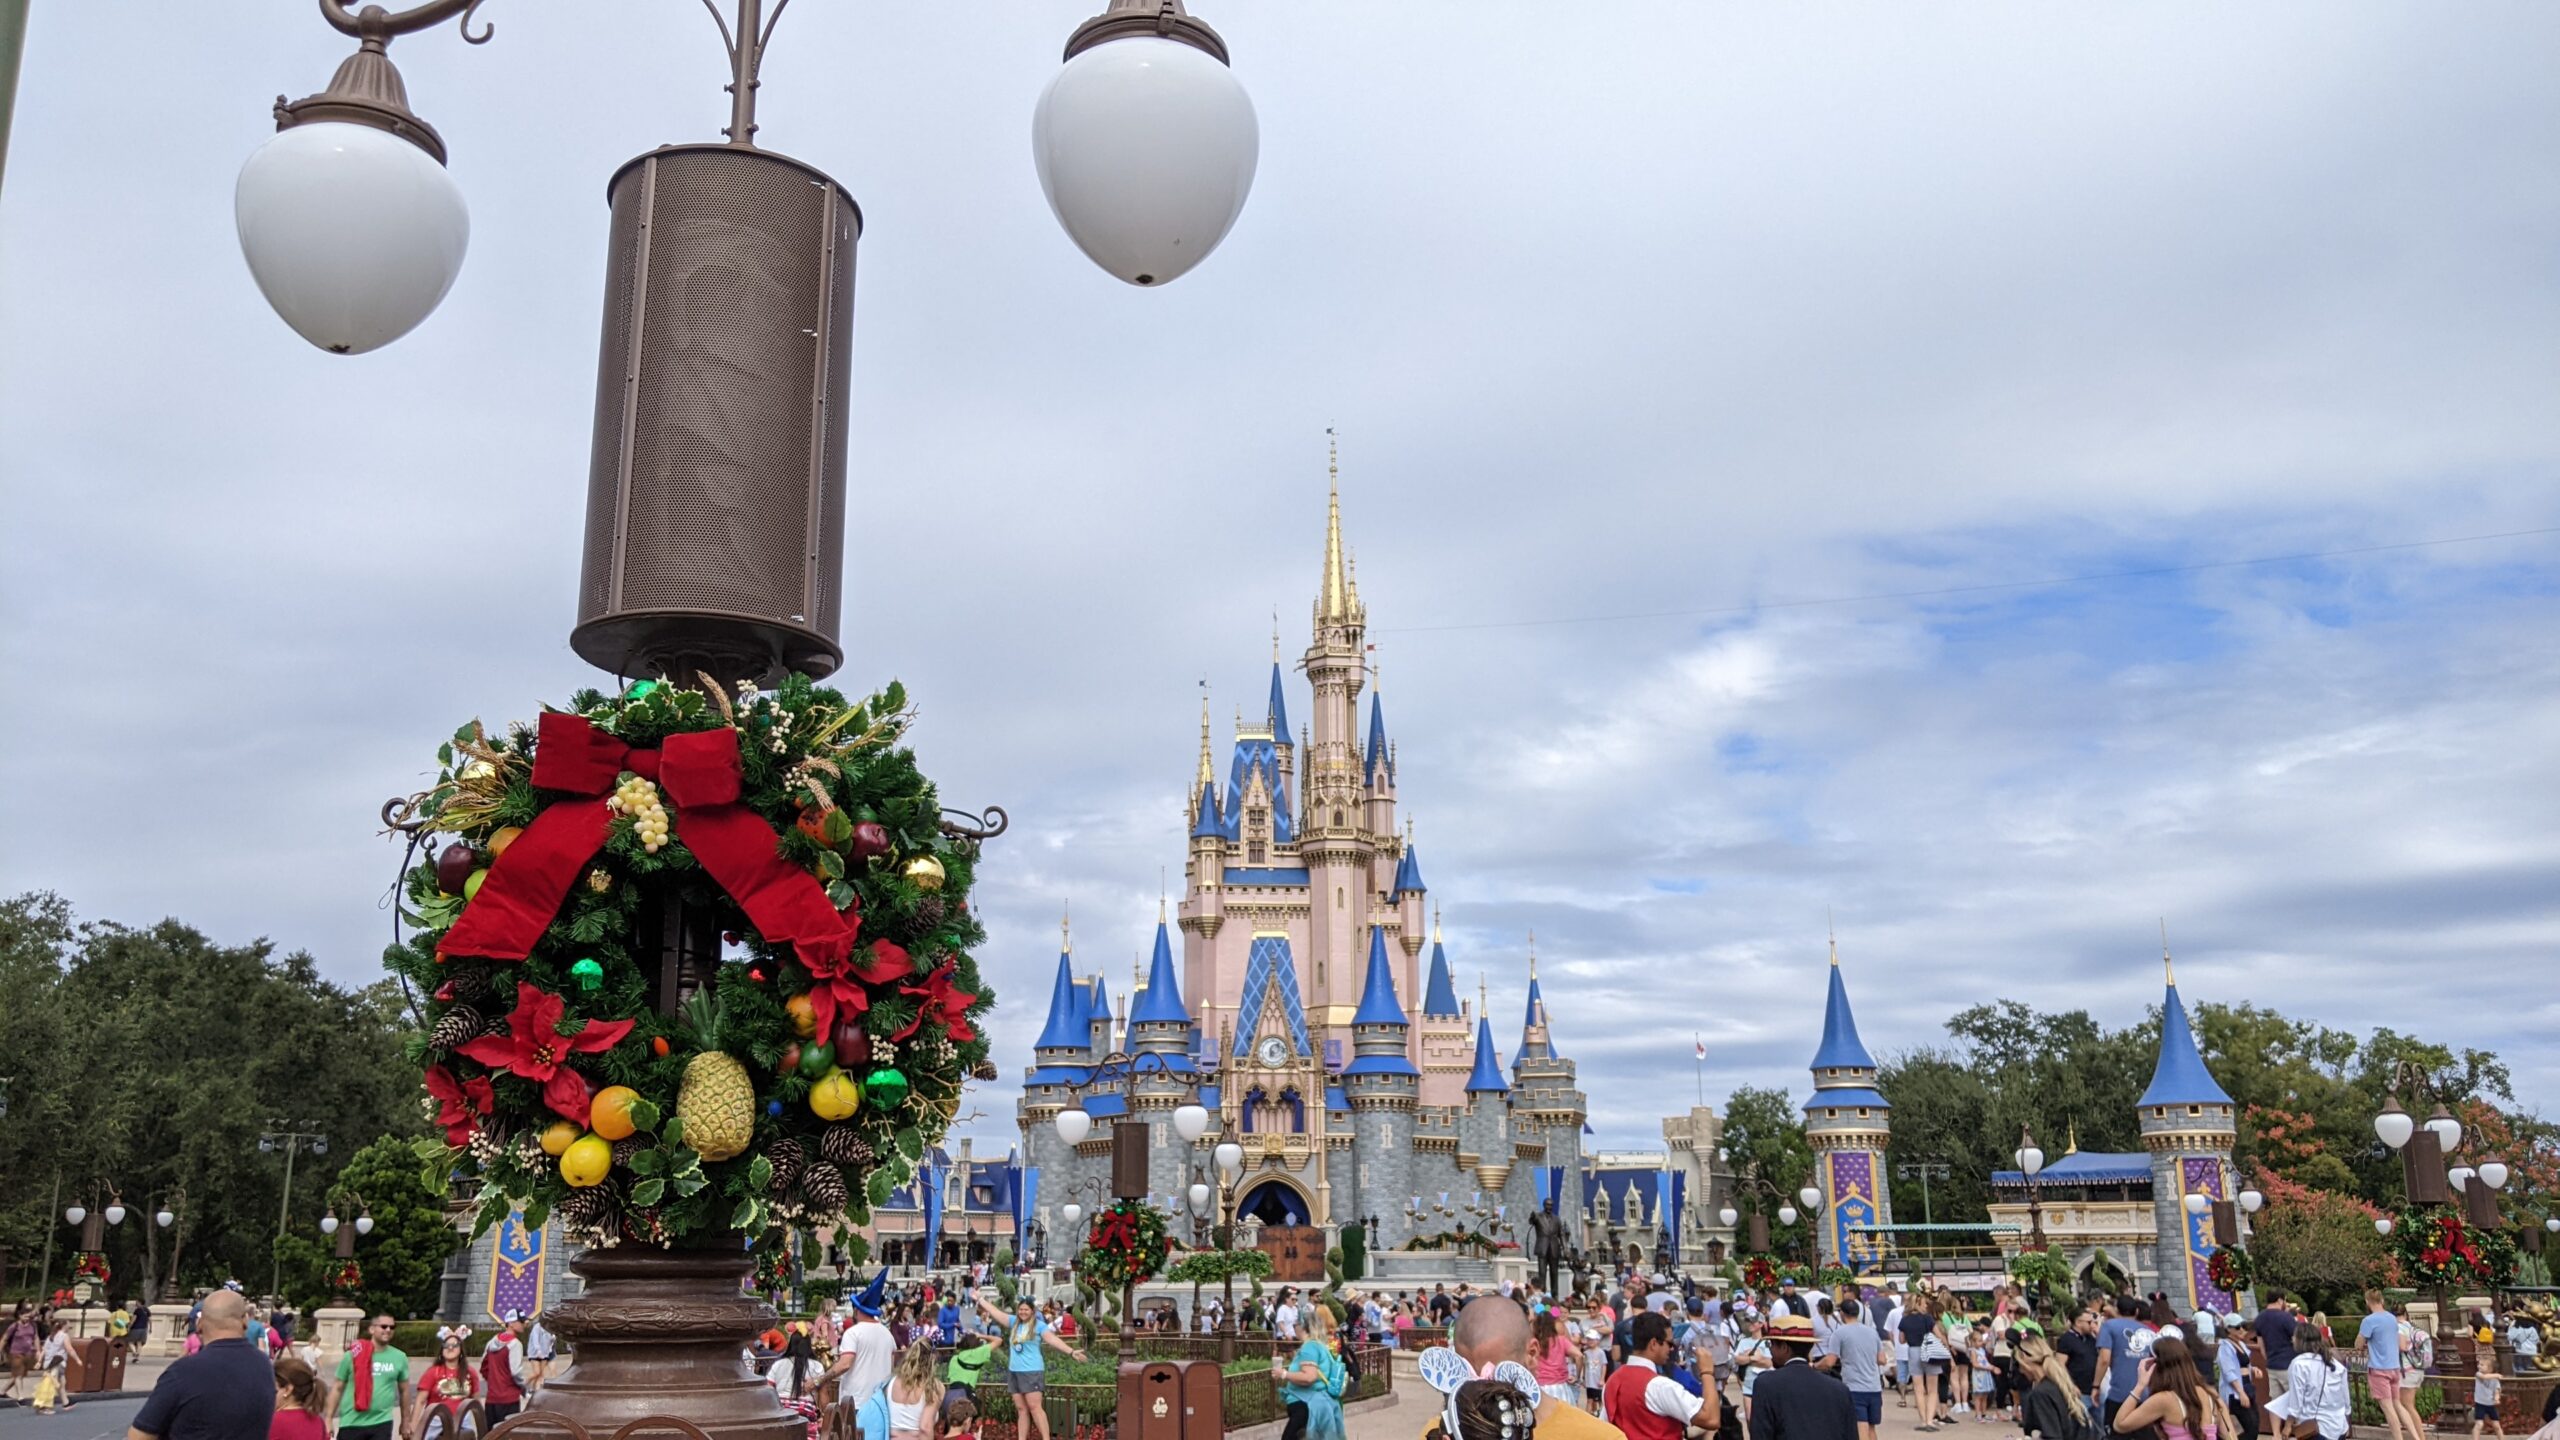 Former Disney Employee: Here’s What to Pack for Disney World in December